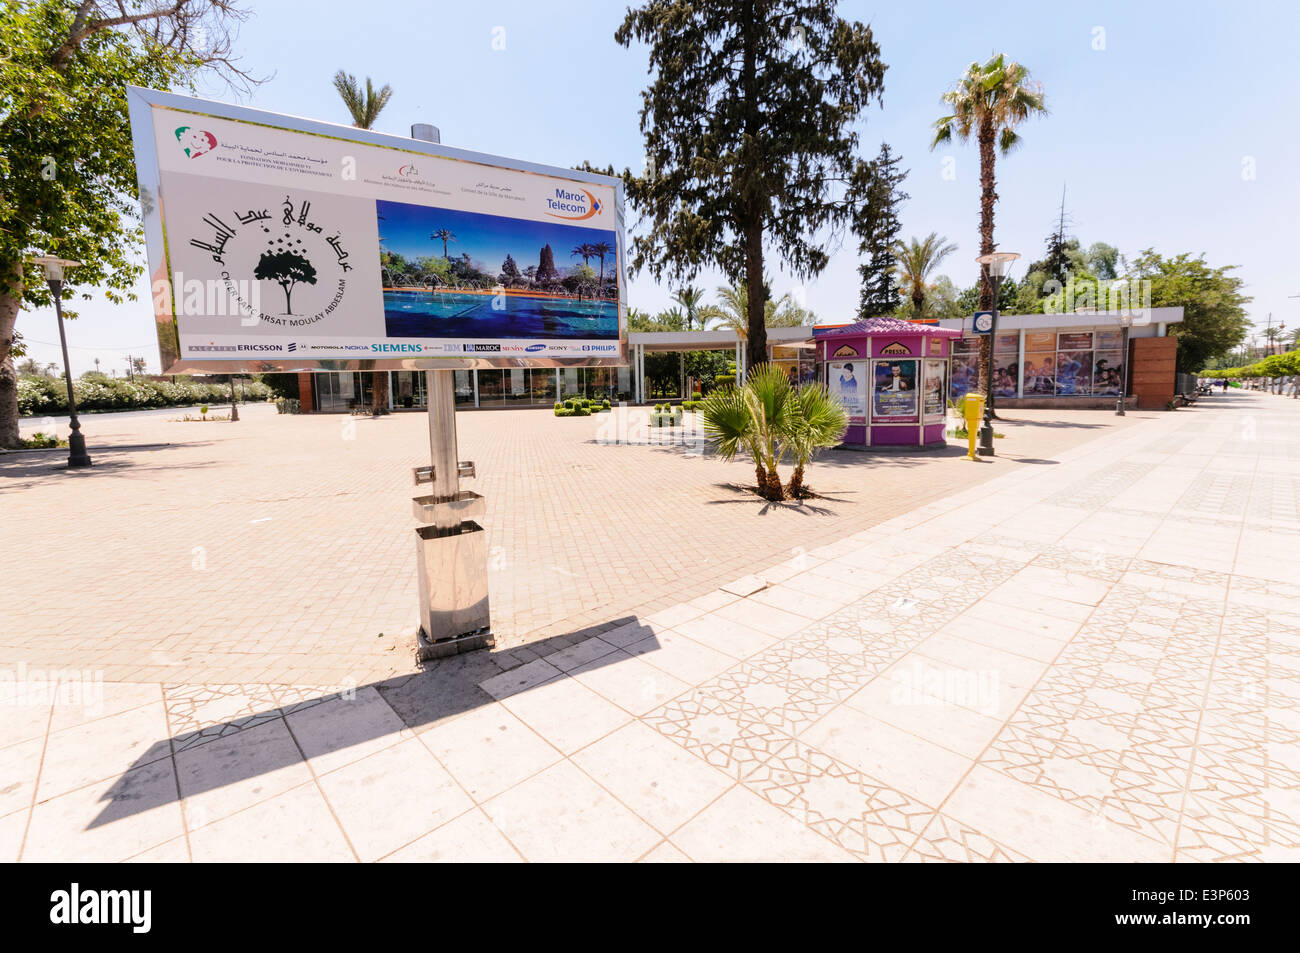 Sign at the Maroc Telecom Cyber Parc in Marrakech, Morocco Stock Photo -  Alamy